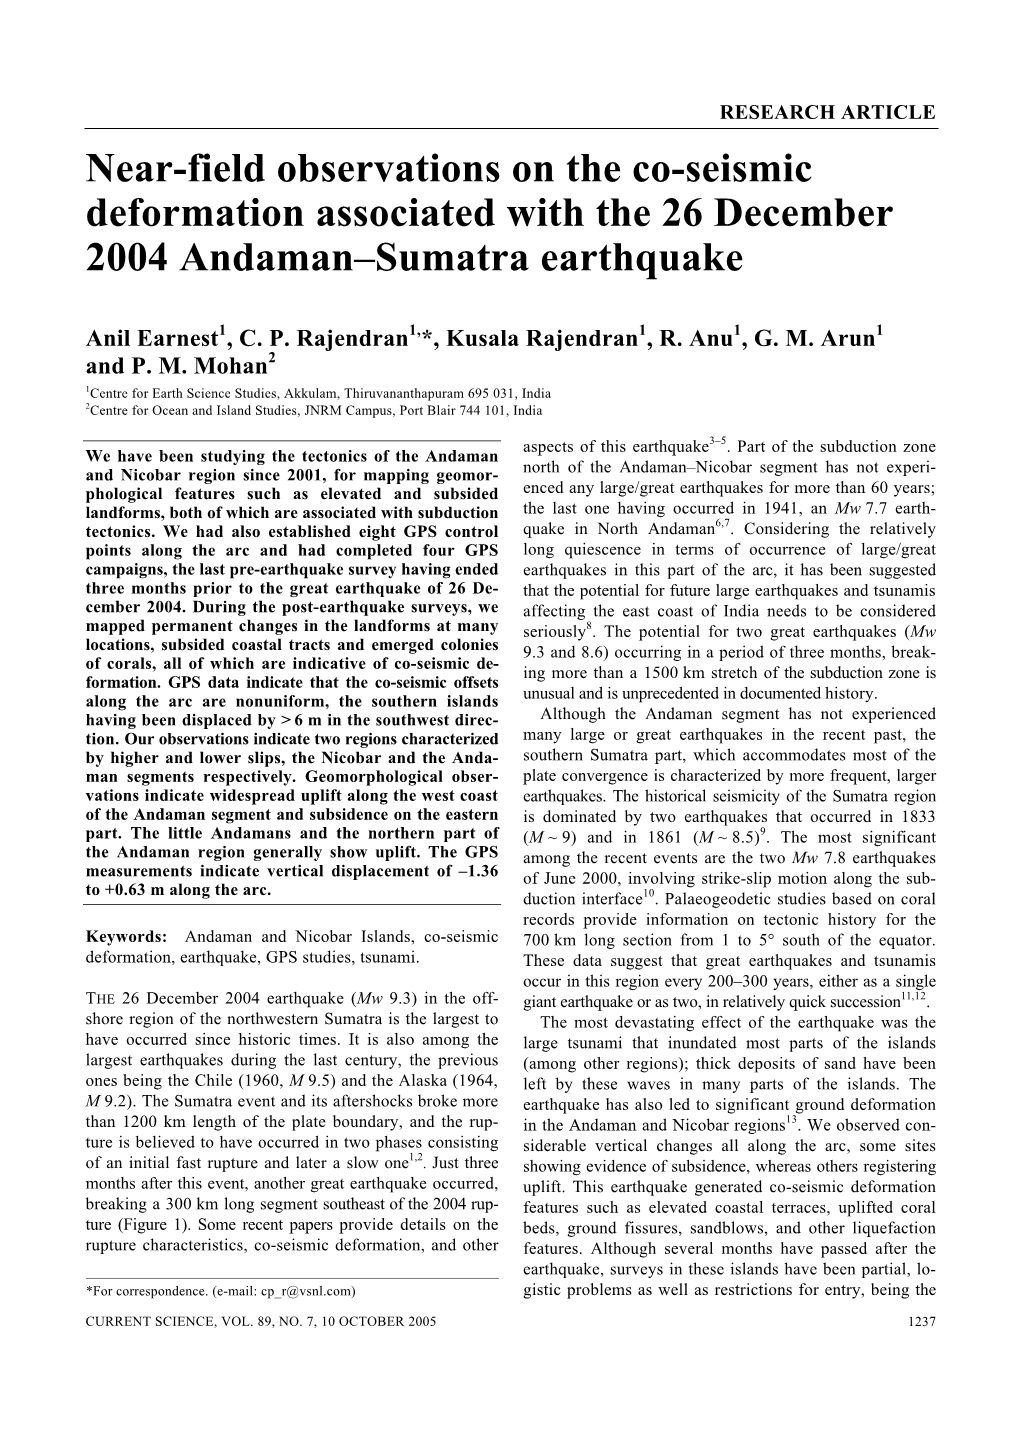 Near-Field Observations on the Co-Seismic Deformation Associated with the 26 December 2004 Andaman–Sumatra Earthquake